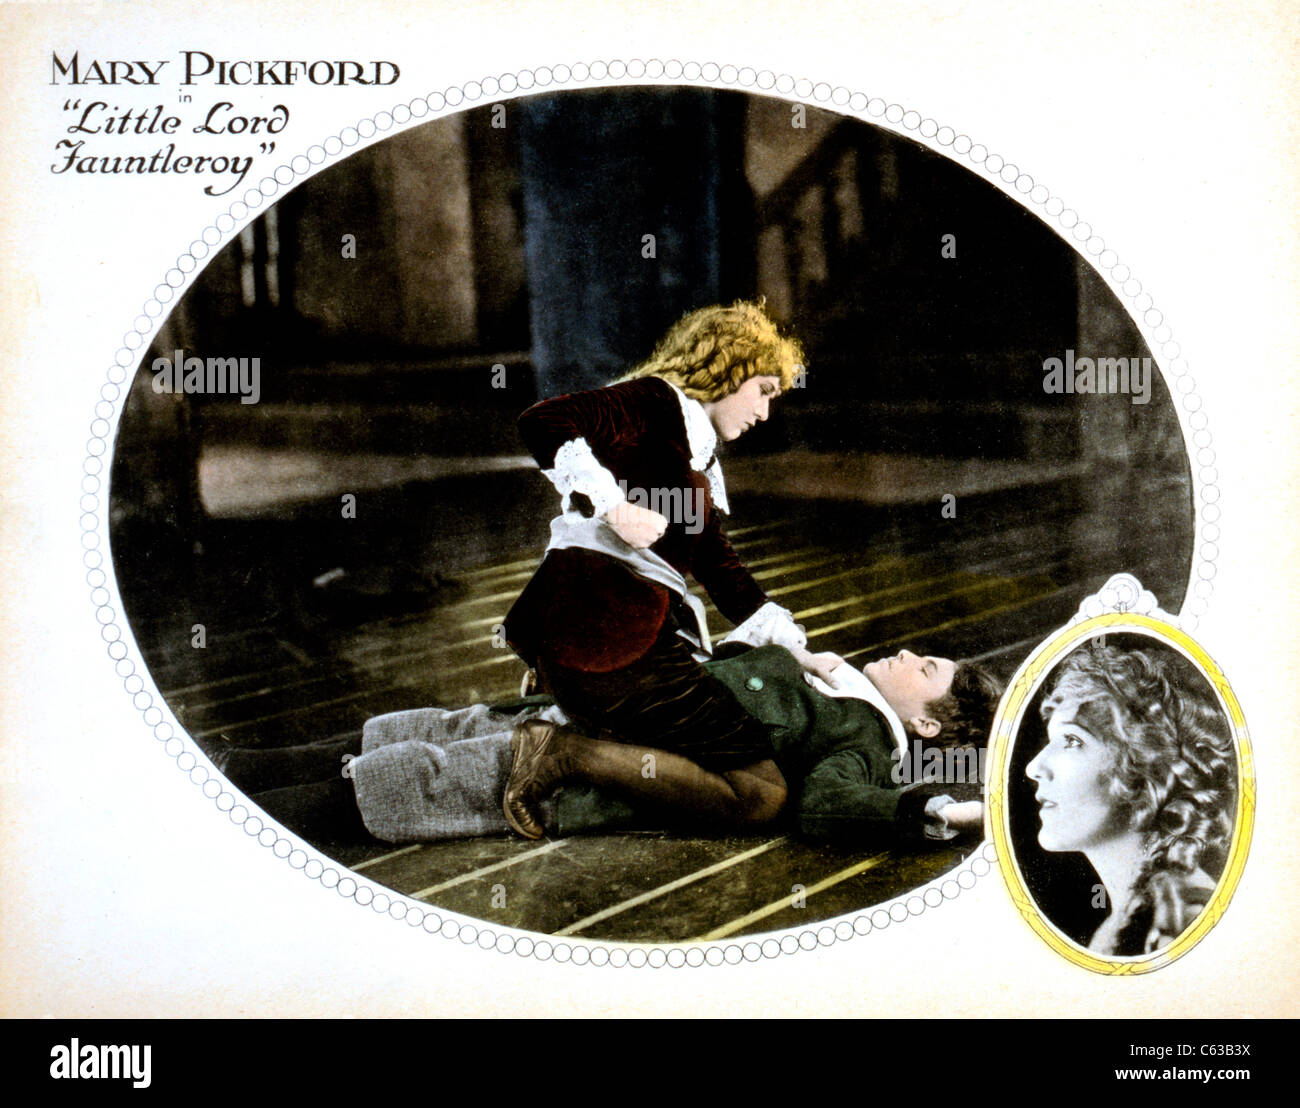 Mary Pickford in "Little Lord Fauntleroy" 1921 Filmplakat Stockfoto